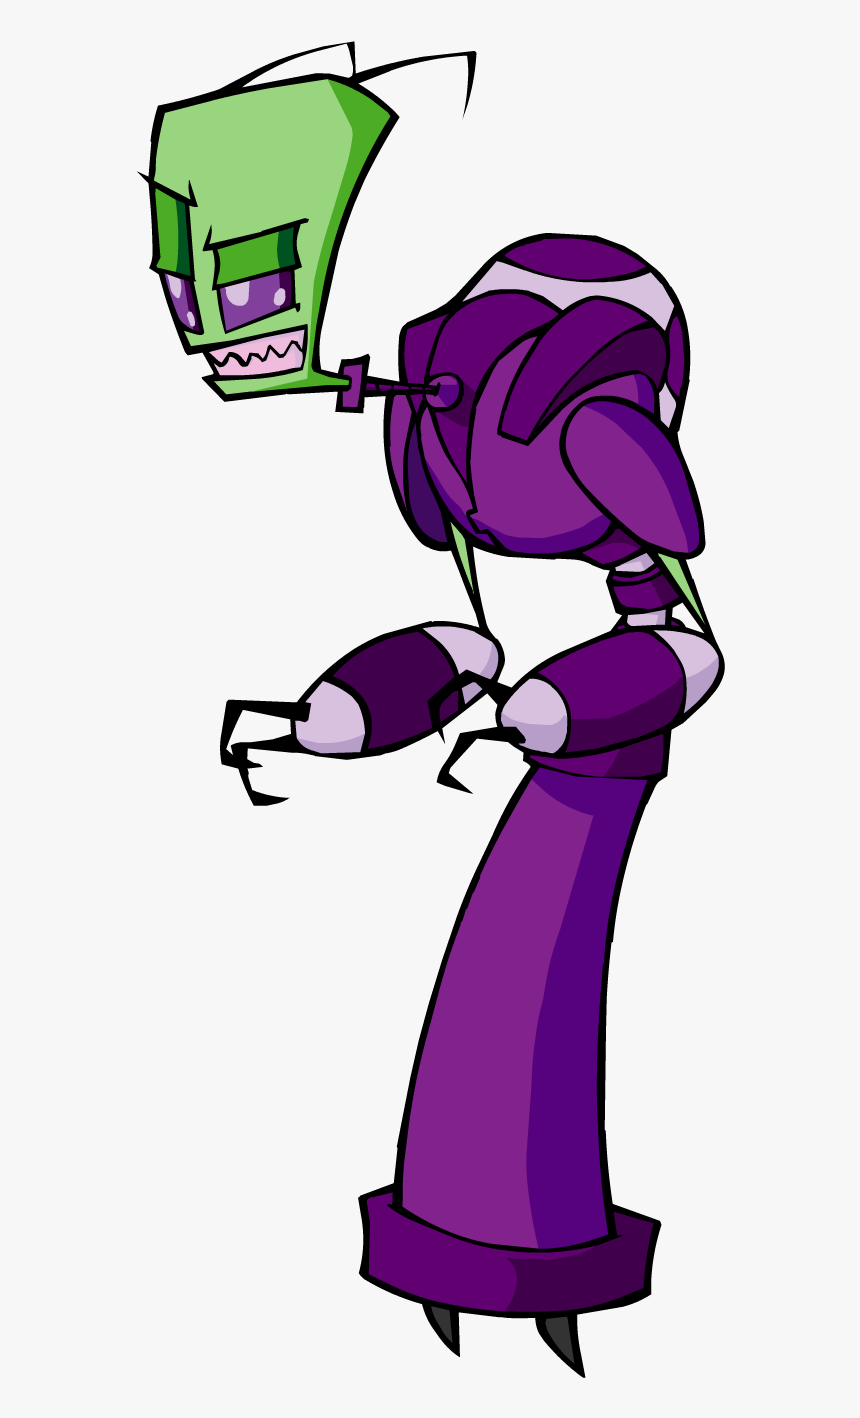 Animated Avatar - Tallest Purple Invader Zim, HD Png Download, Free Download